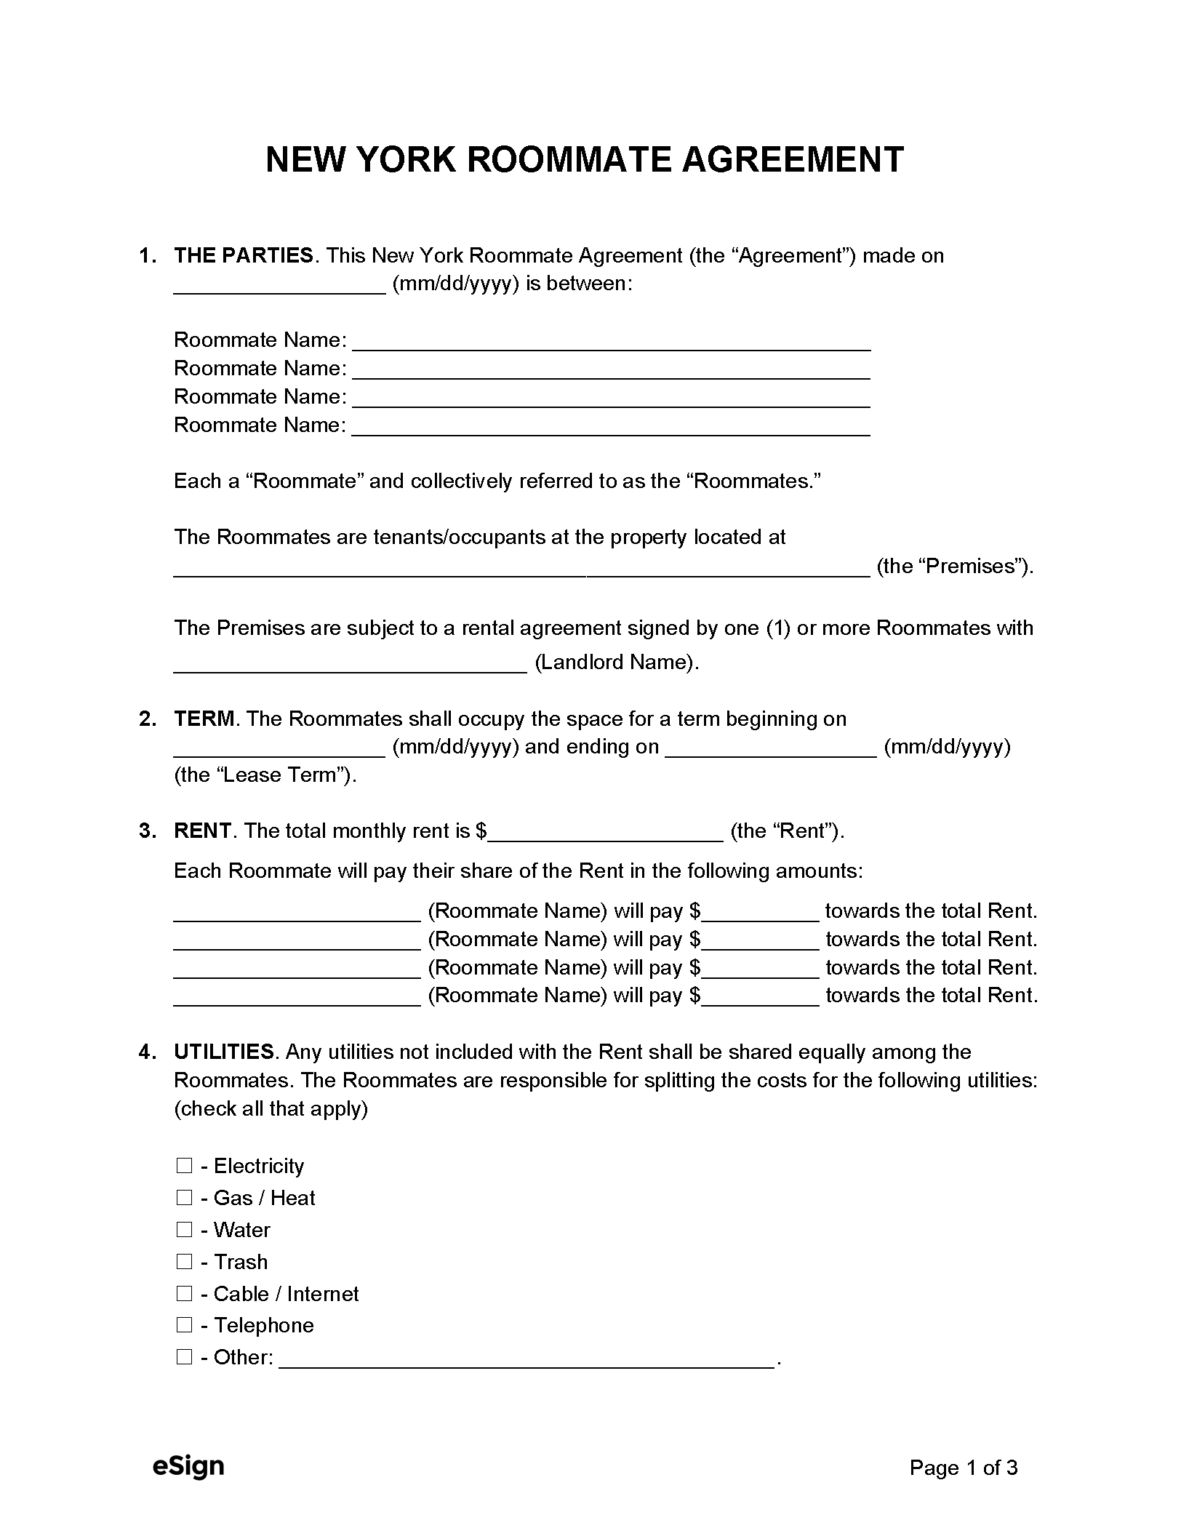 Free New York Roommate Agreement Template | PDF | Word